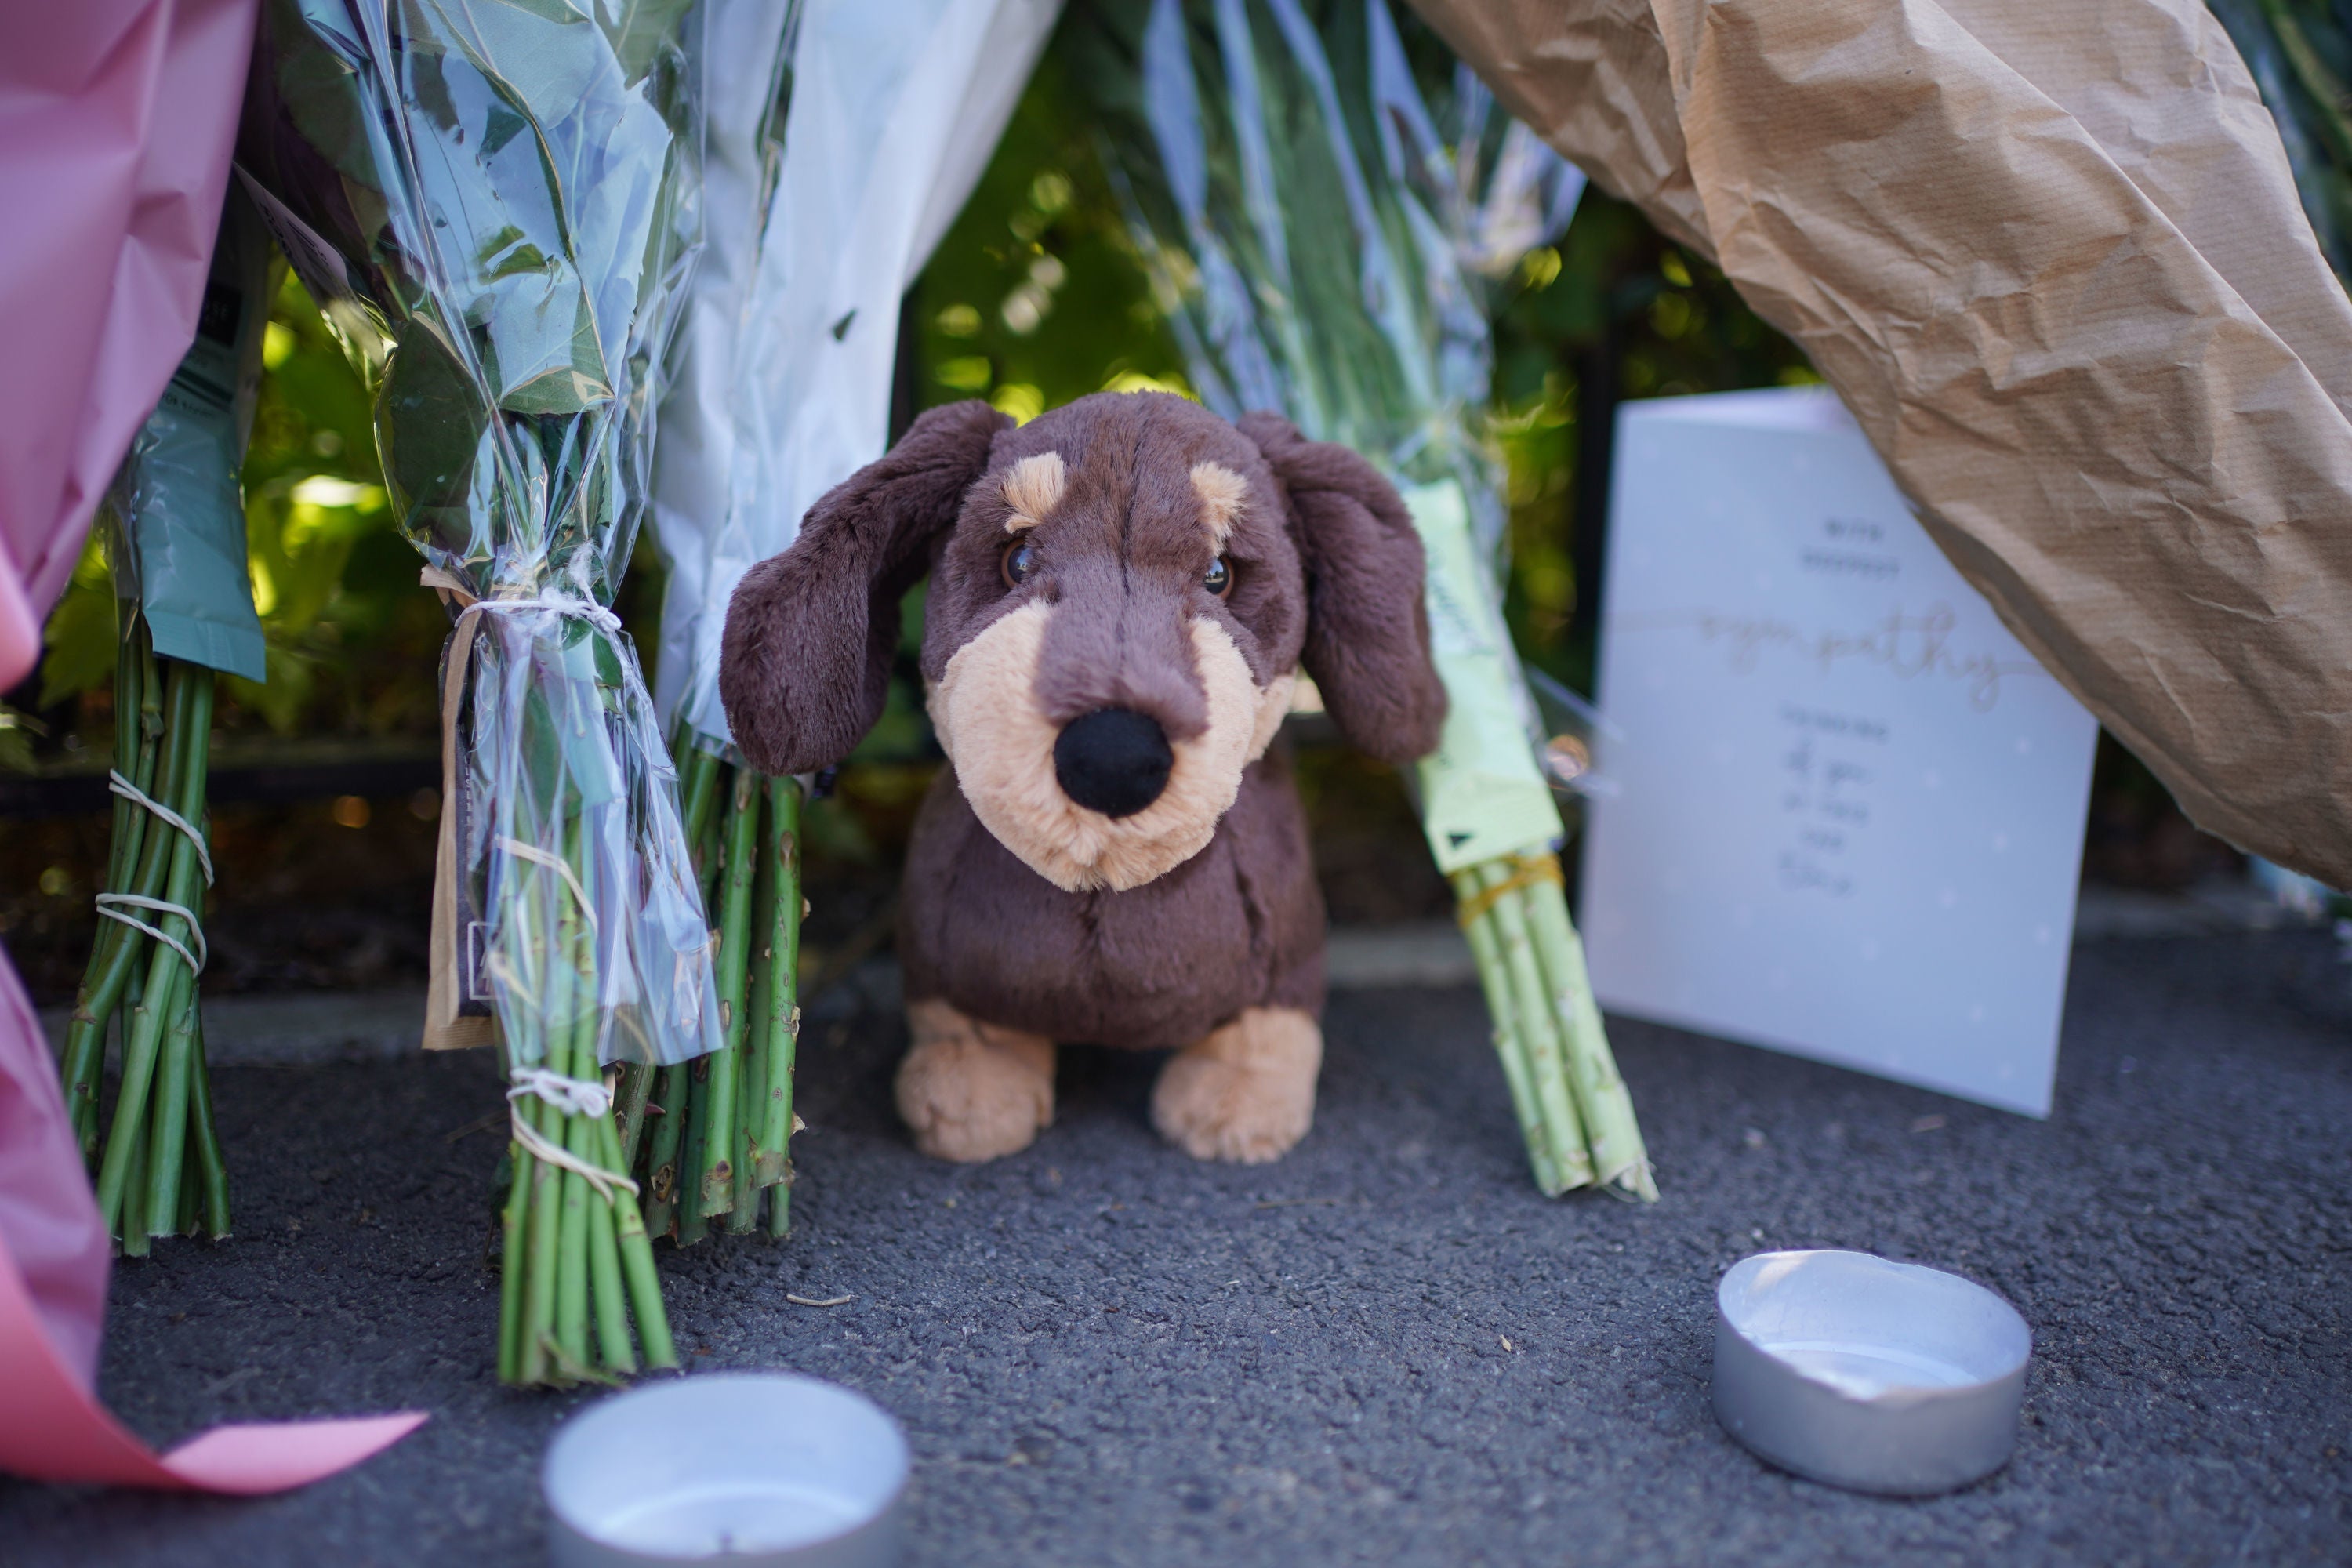 A stuffed toy of a dog, candles and flowers placed outside the Study Preparatory School in Wimbledon, south-west London, after a Land Rover crashed into the girls' prep school building on the last day of term. An eight-year-old girl was killed and 10 people were taken to hospital following the incident. A woman in her 40s has been arrested on suspicion of causing death by dangerous driving.